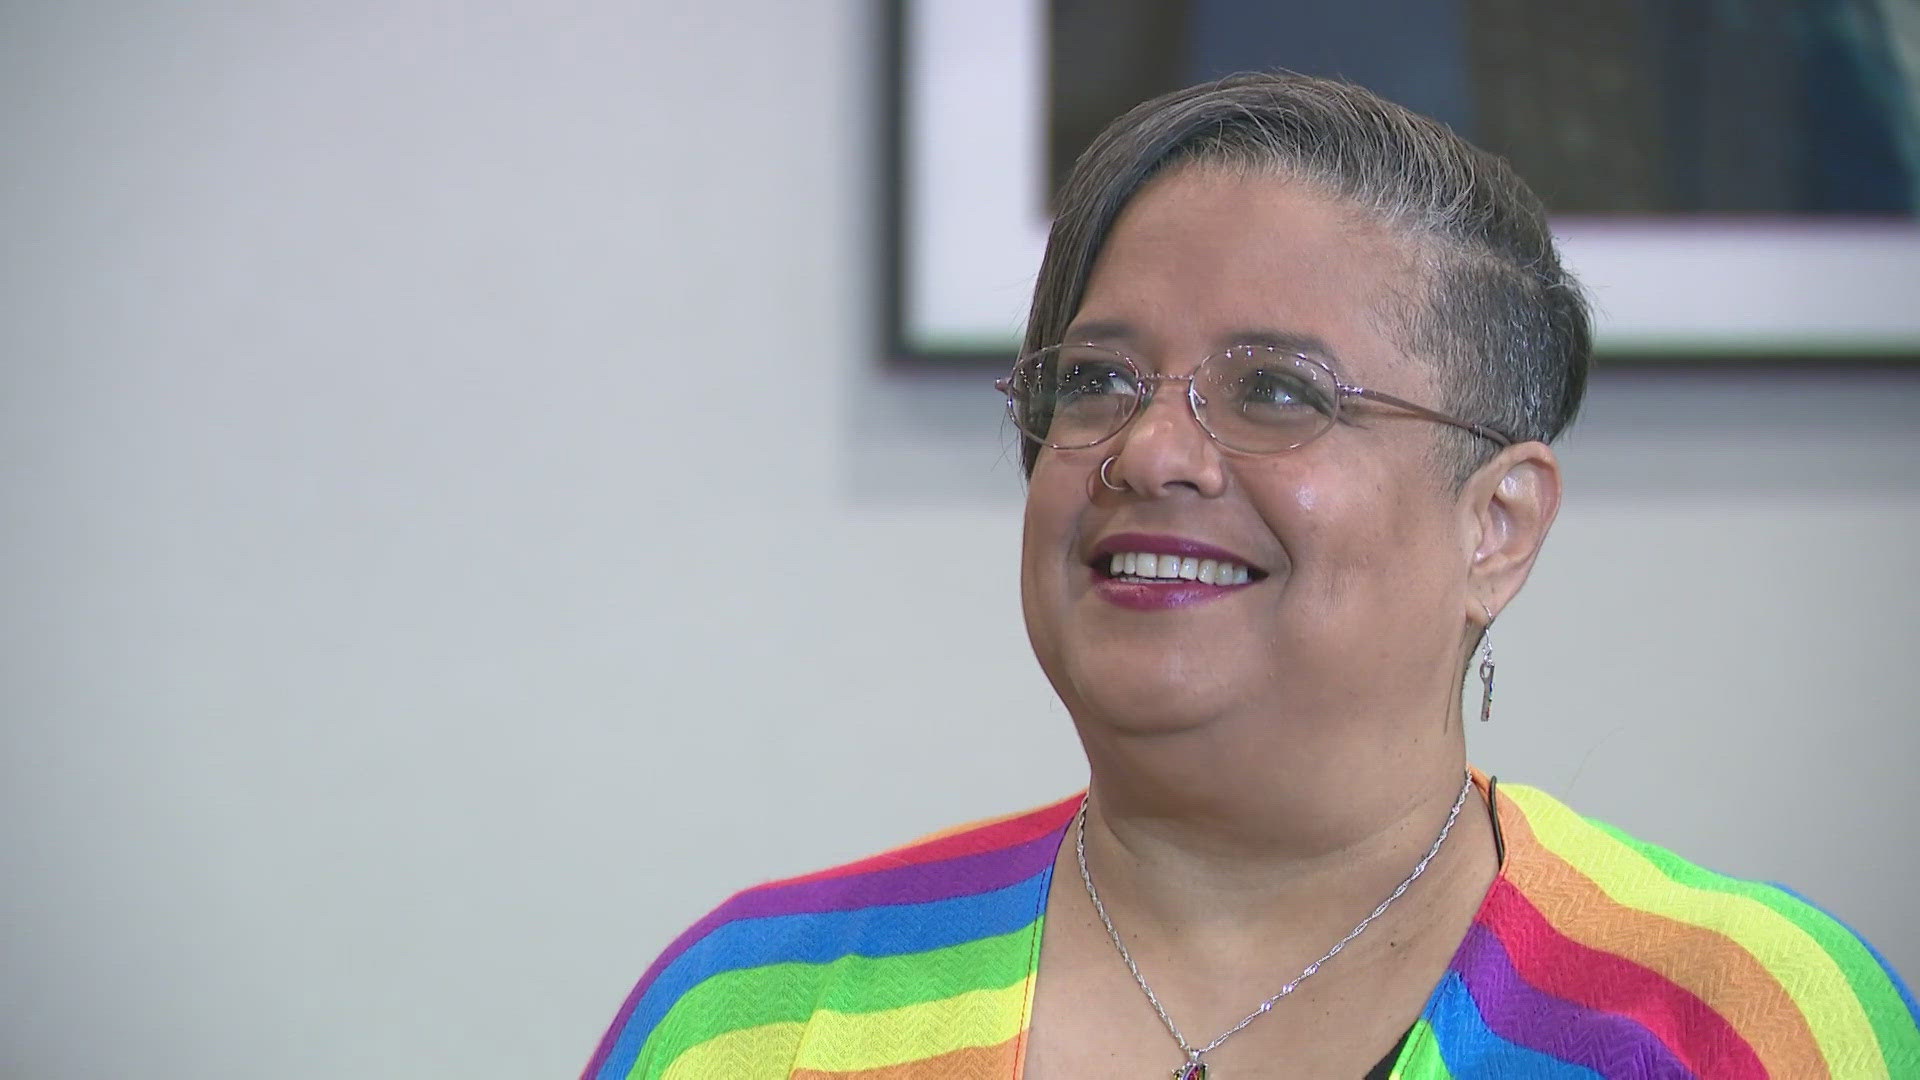 Kym Adams knows what it's like to be an openly gay business owner in Houston.